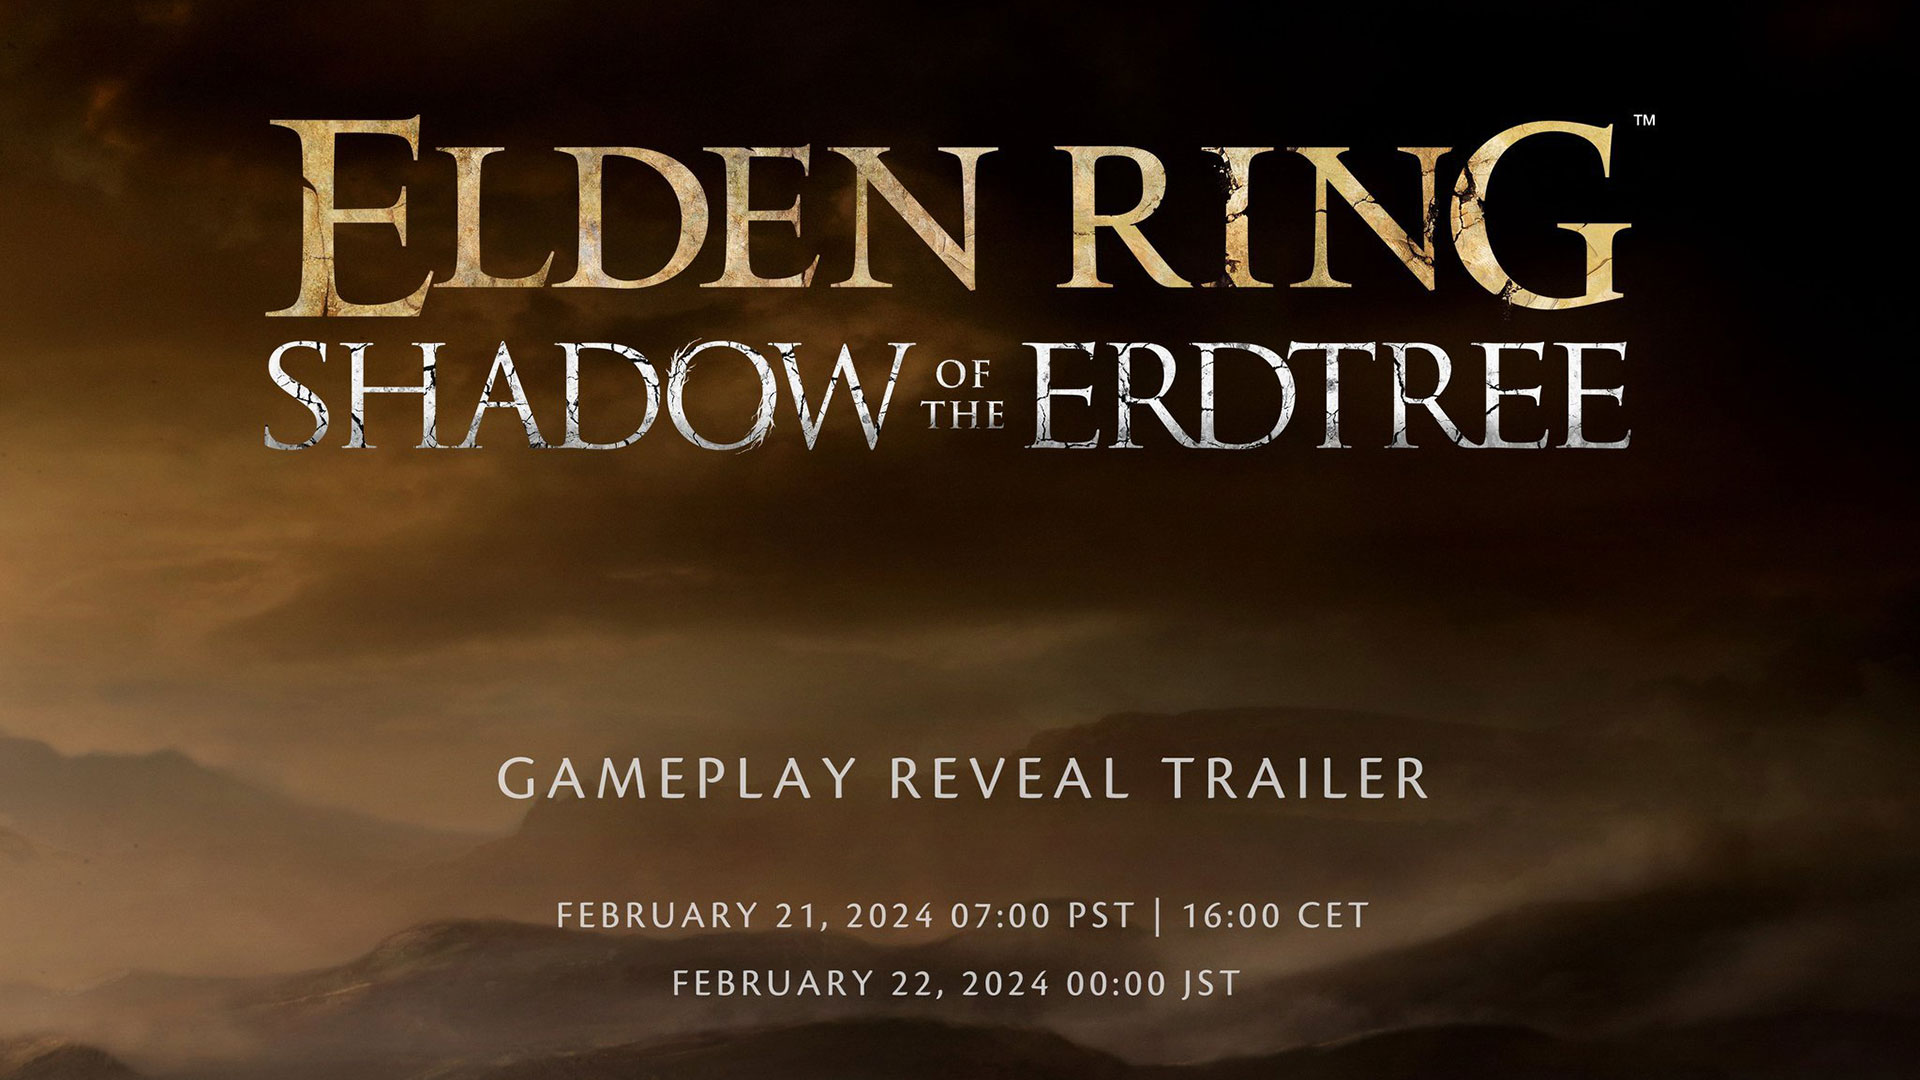 We'll finally get our first look at Elden Ring: Shadow of the Erdtree